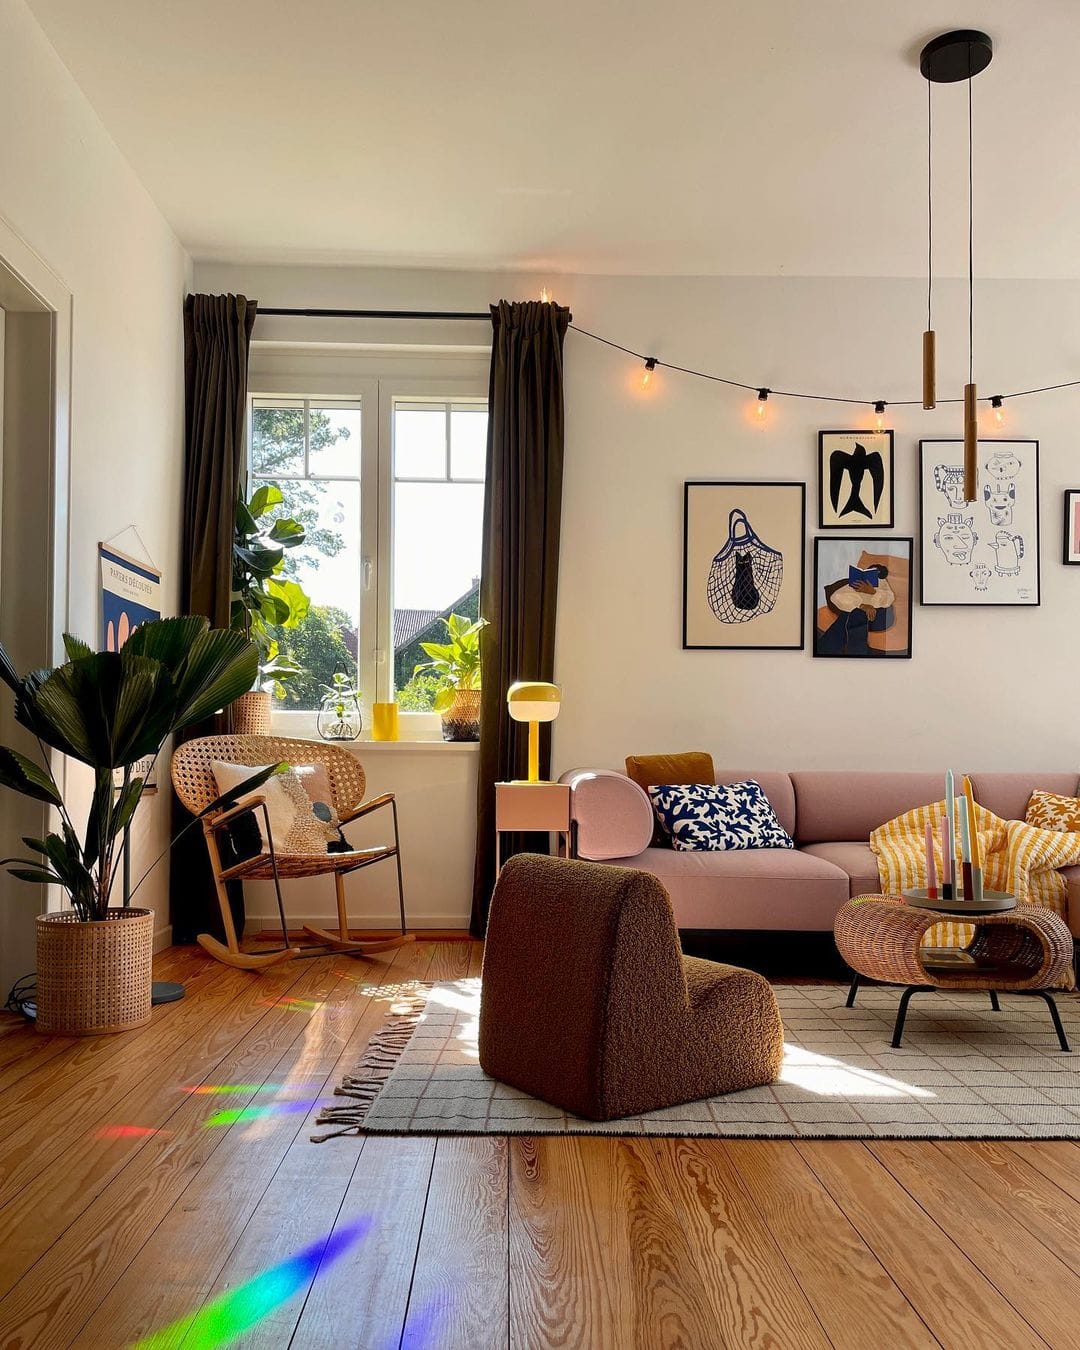 Trendy decor apartment with eclectic mix of colors and art pieces featured in "Timeless vs. Trendy Decor" 